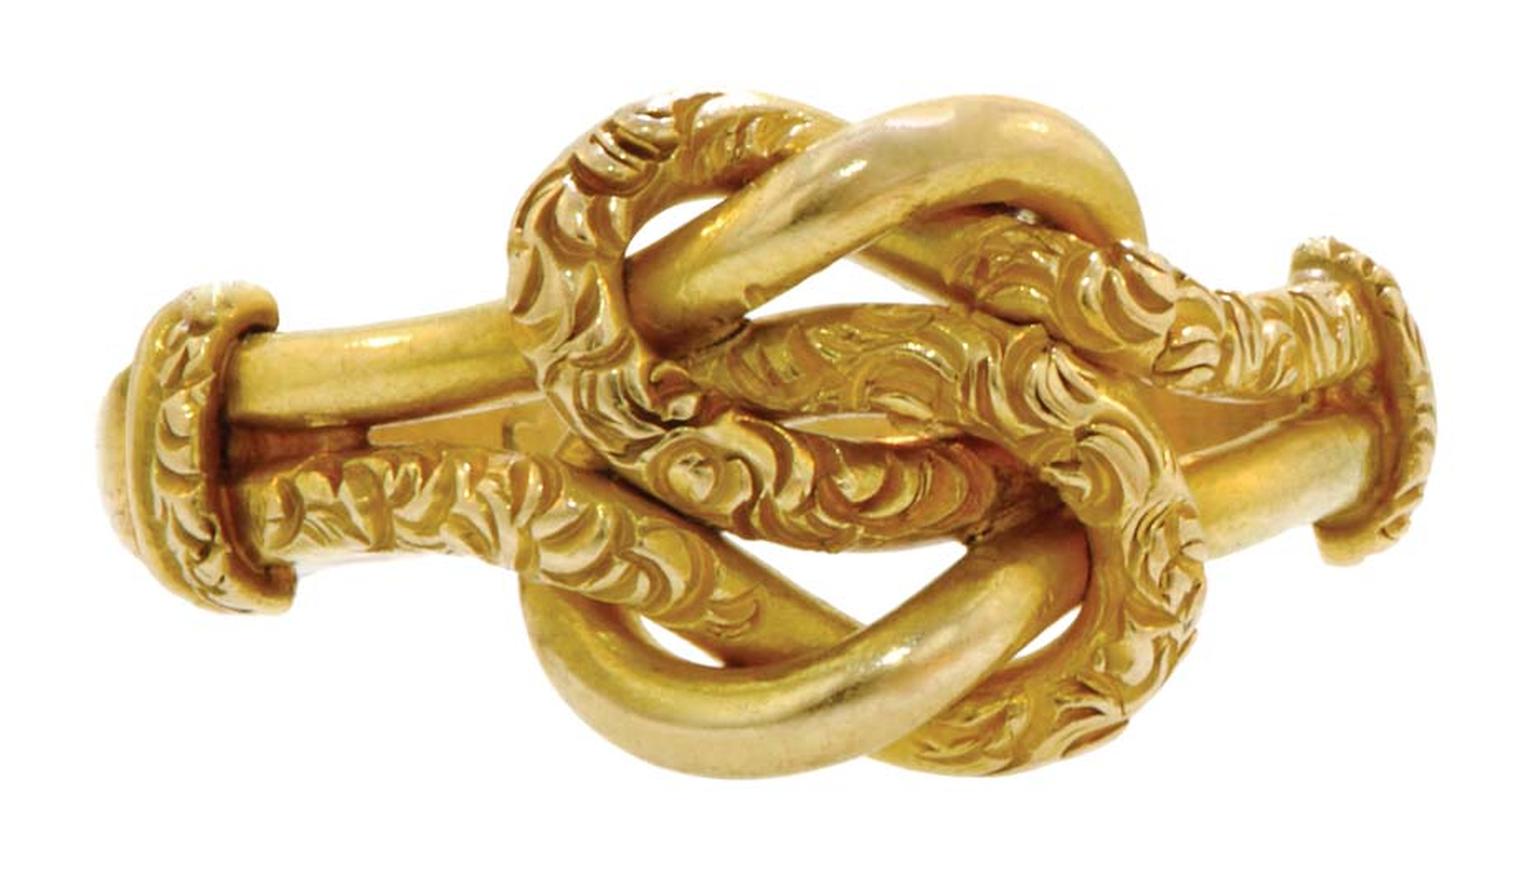 Double Lovers' Knot ring in gold featuring a pair of intertwined knots, one plain, one chased, circa 1860.